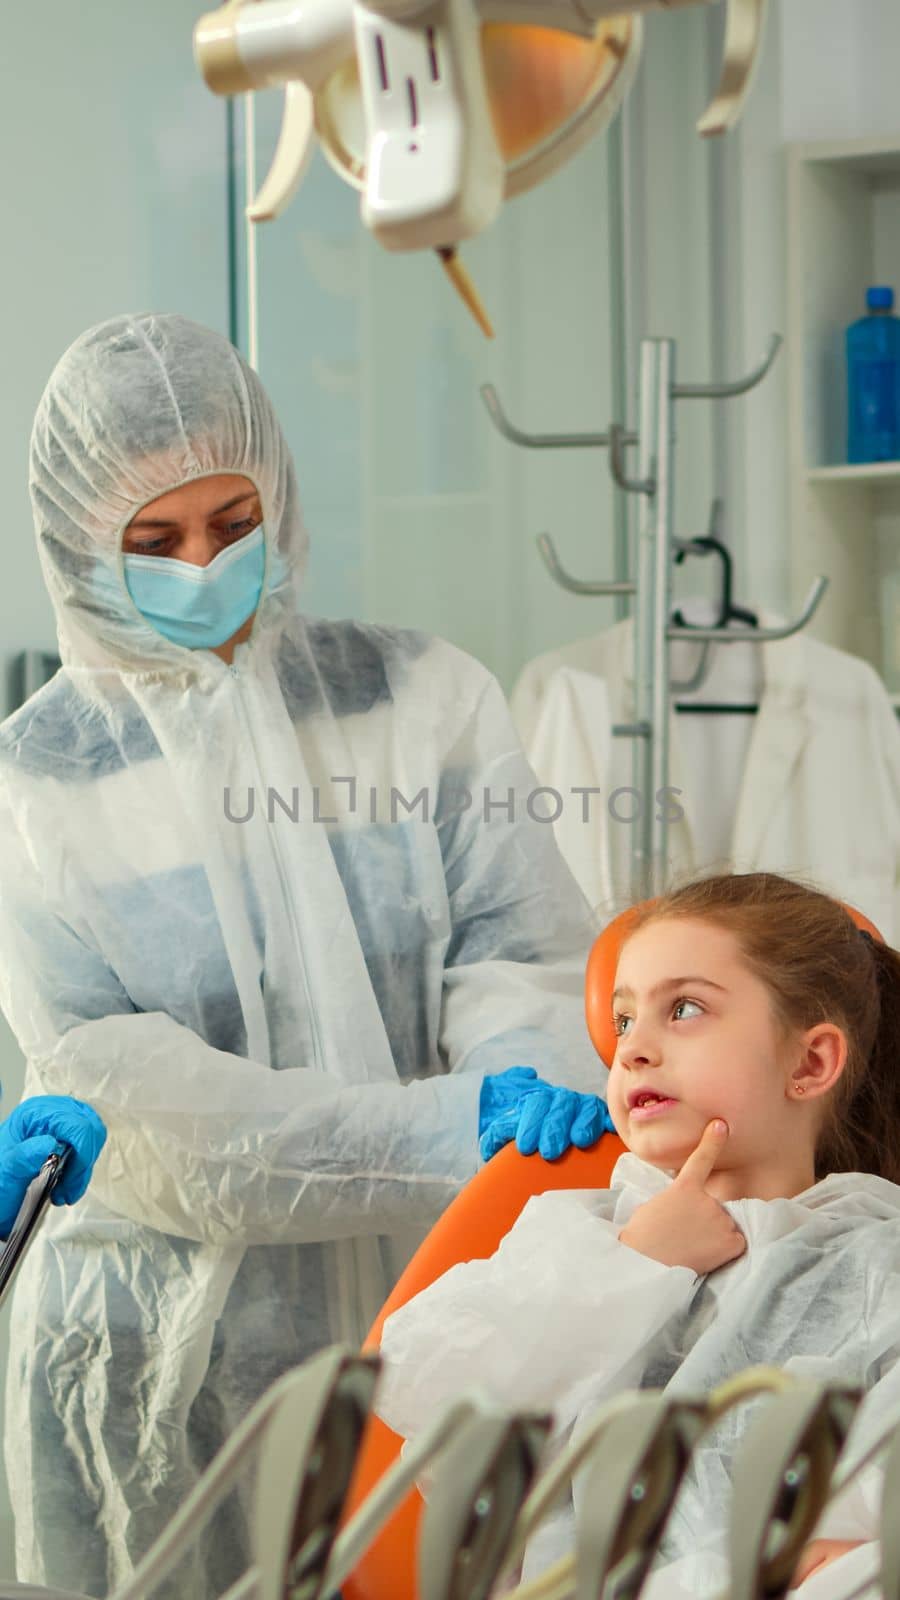 Dentist doctor in ppe suit interrogating kid patient and taking notes on clipboard while girl indicating affected mass. Stomatologist and assistent working in new normal dental office wearing coverall